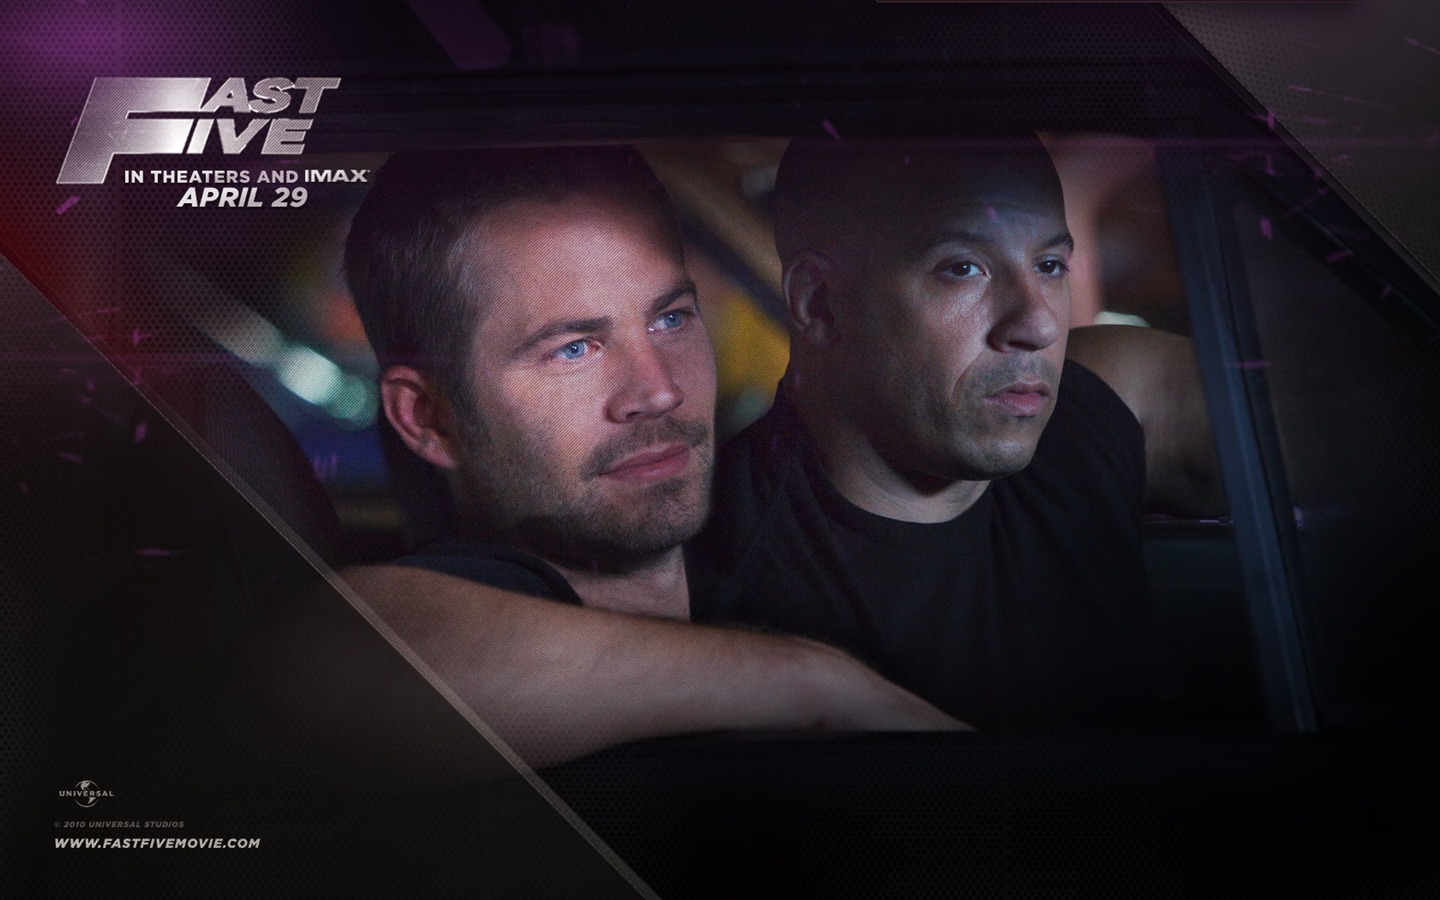 Fast Five wallpapers #7 - 1440x900